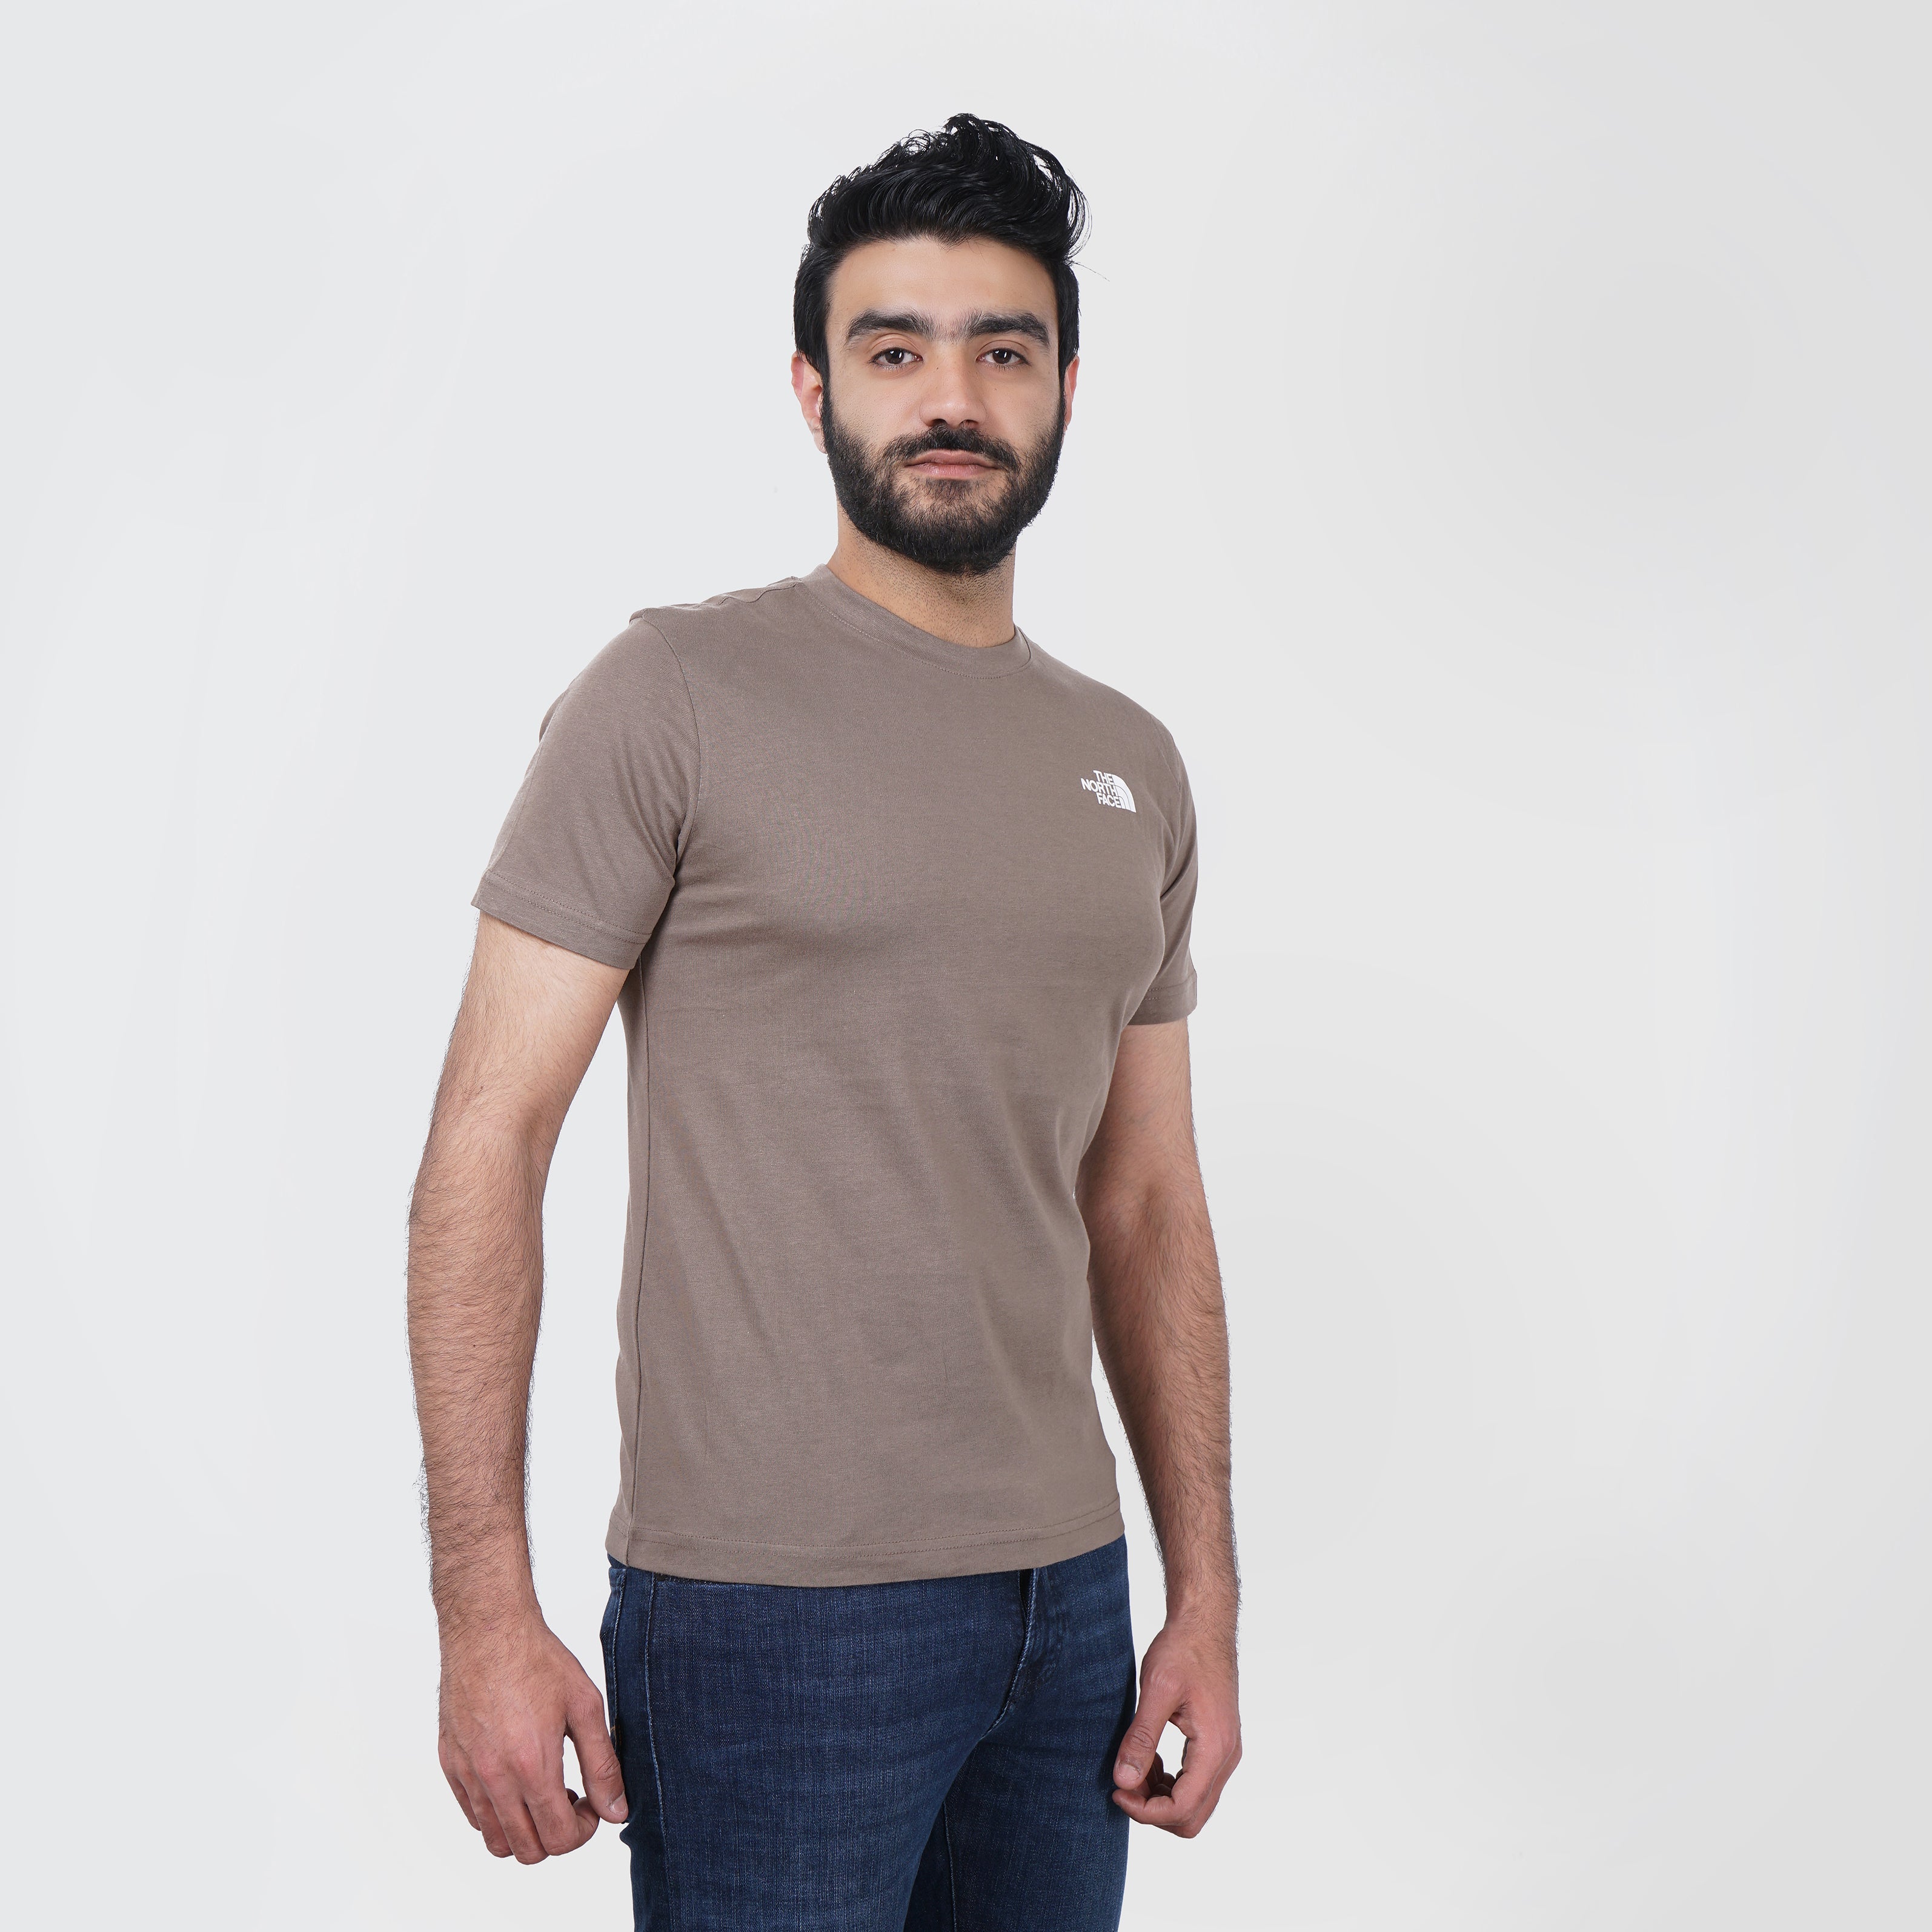 The North Face Printed Tee - Marca Deals - The North Face